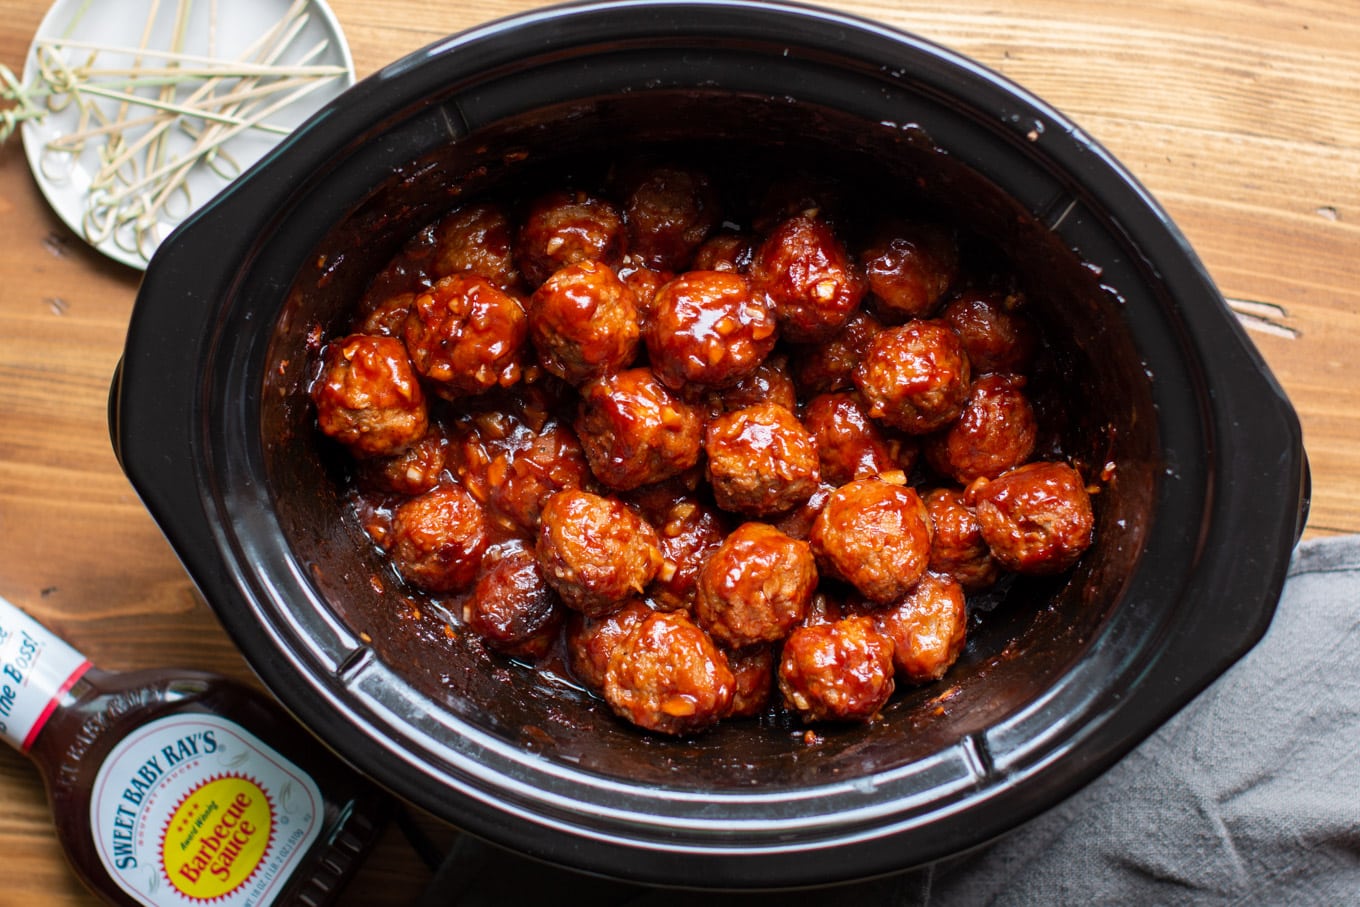 meatballs in a slow cooker with bottle of barbecue sauce and toothpicks on the side.